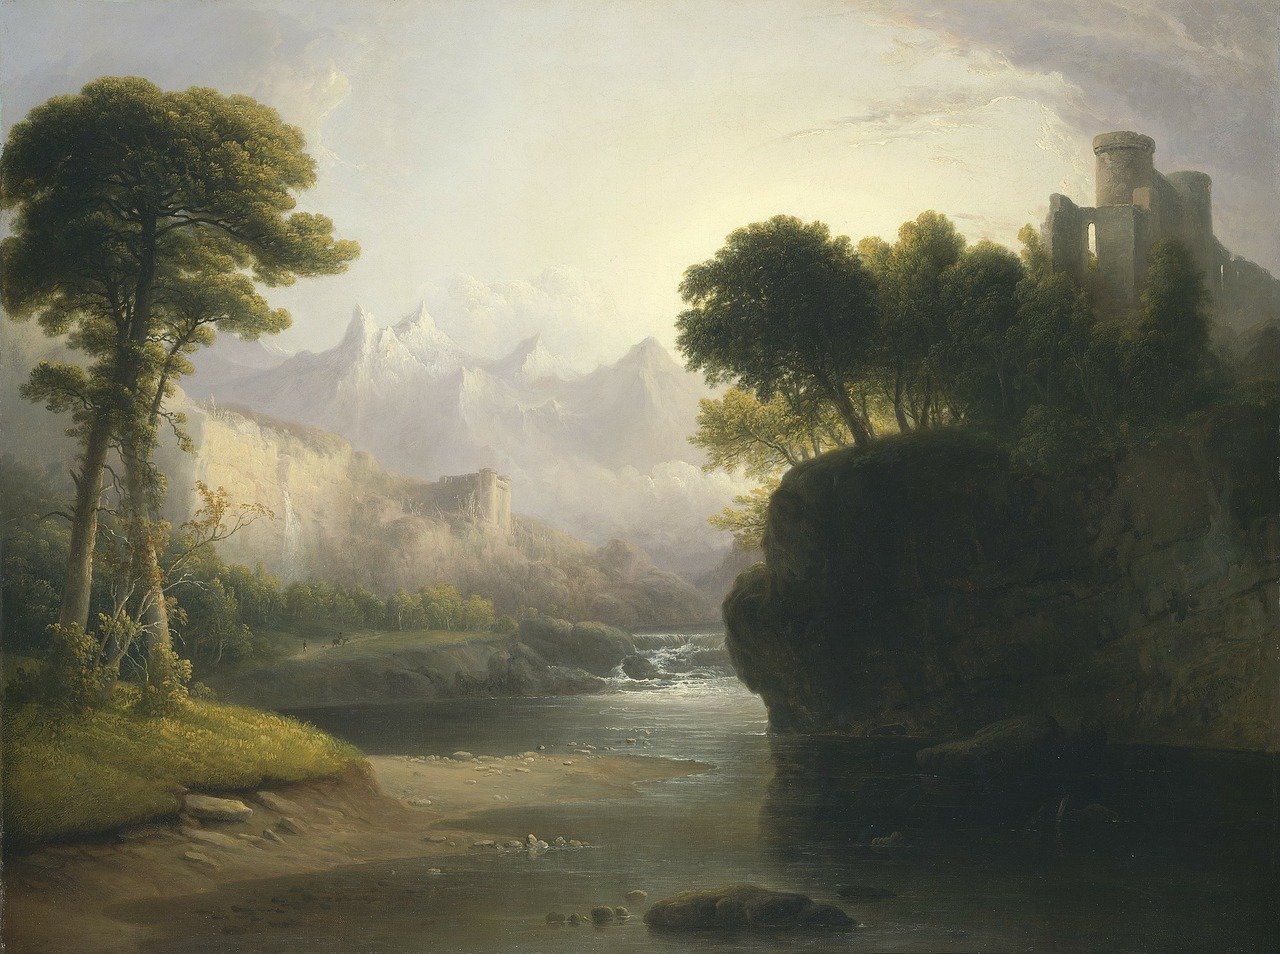 a painting of a river with a castle in the background, a matte painting, inspired by Alexander Nasmyth, hudson river school, mountains in distance, joseph mallord william turner, ancient”